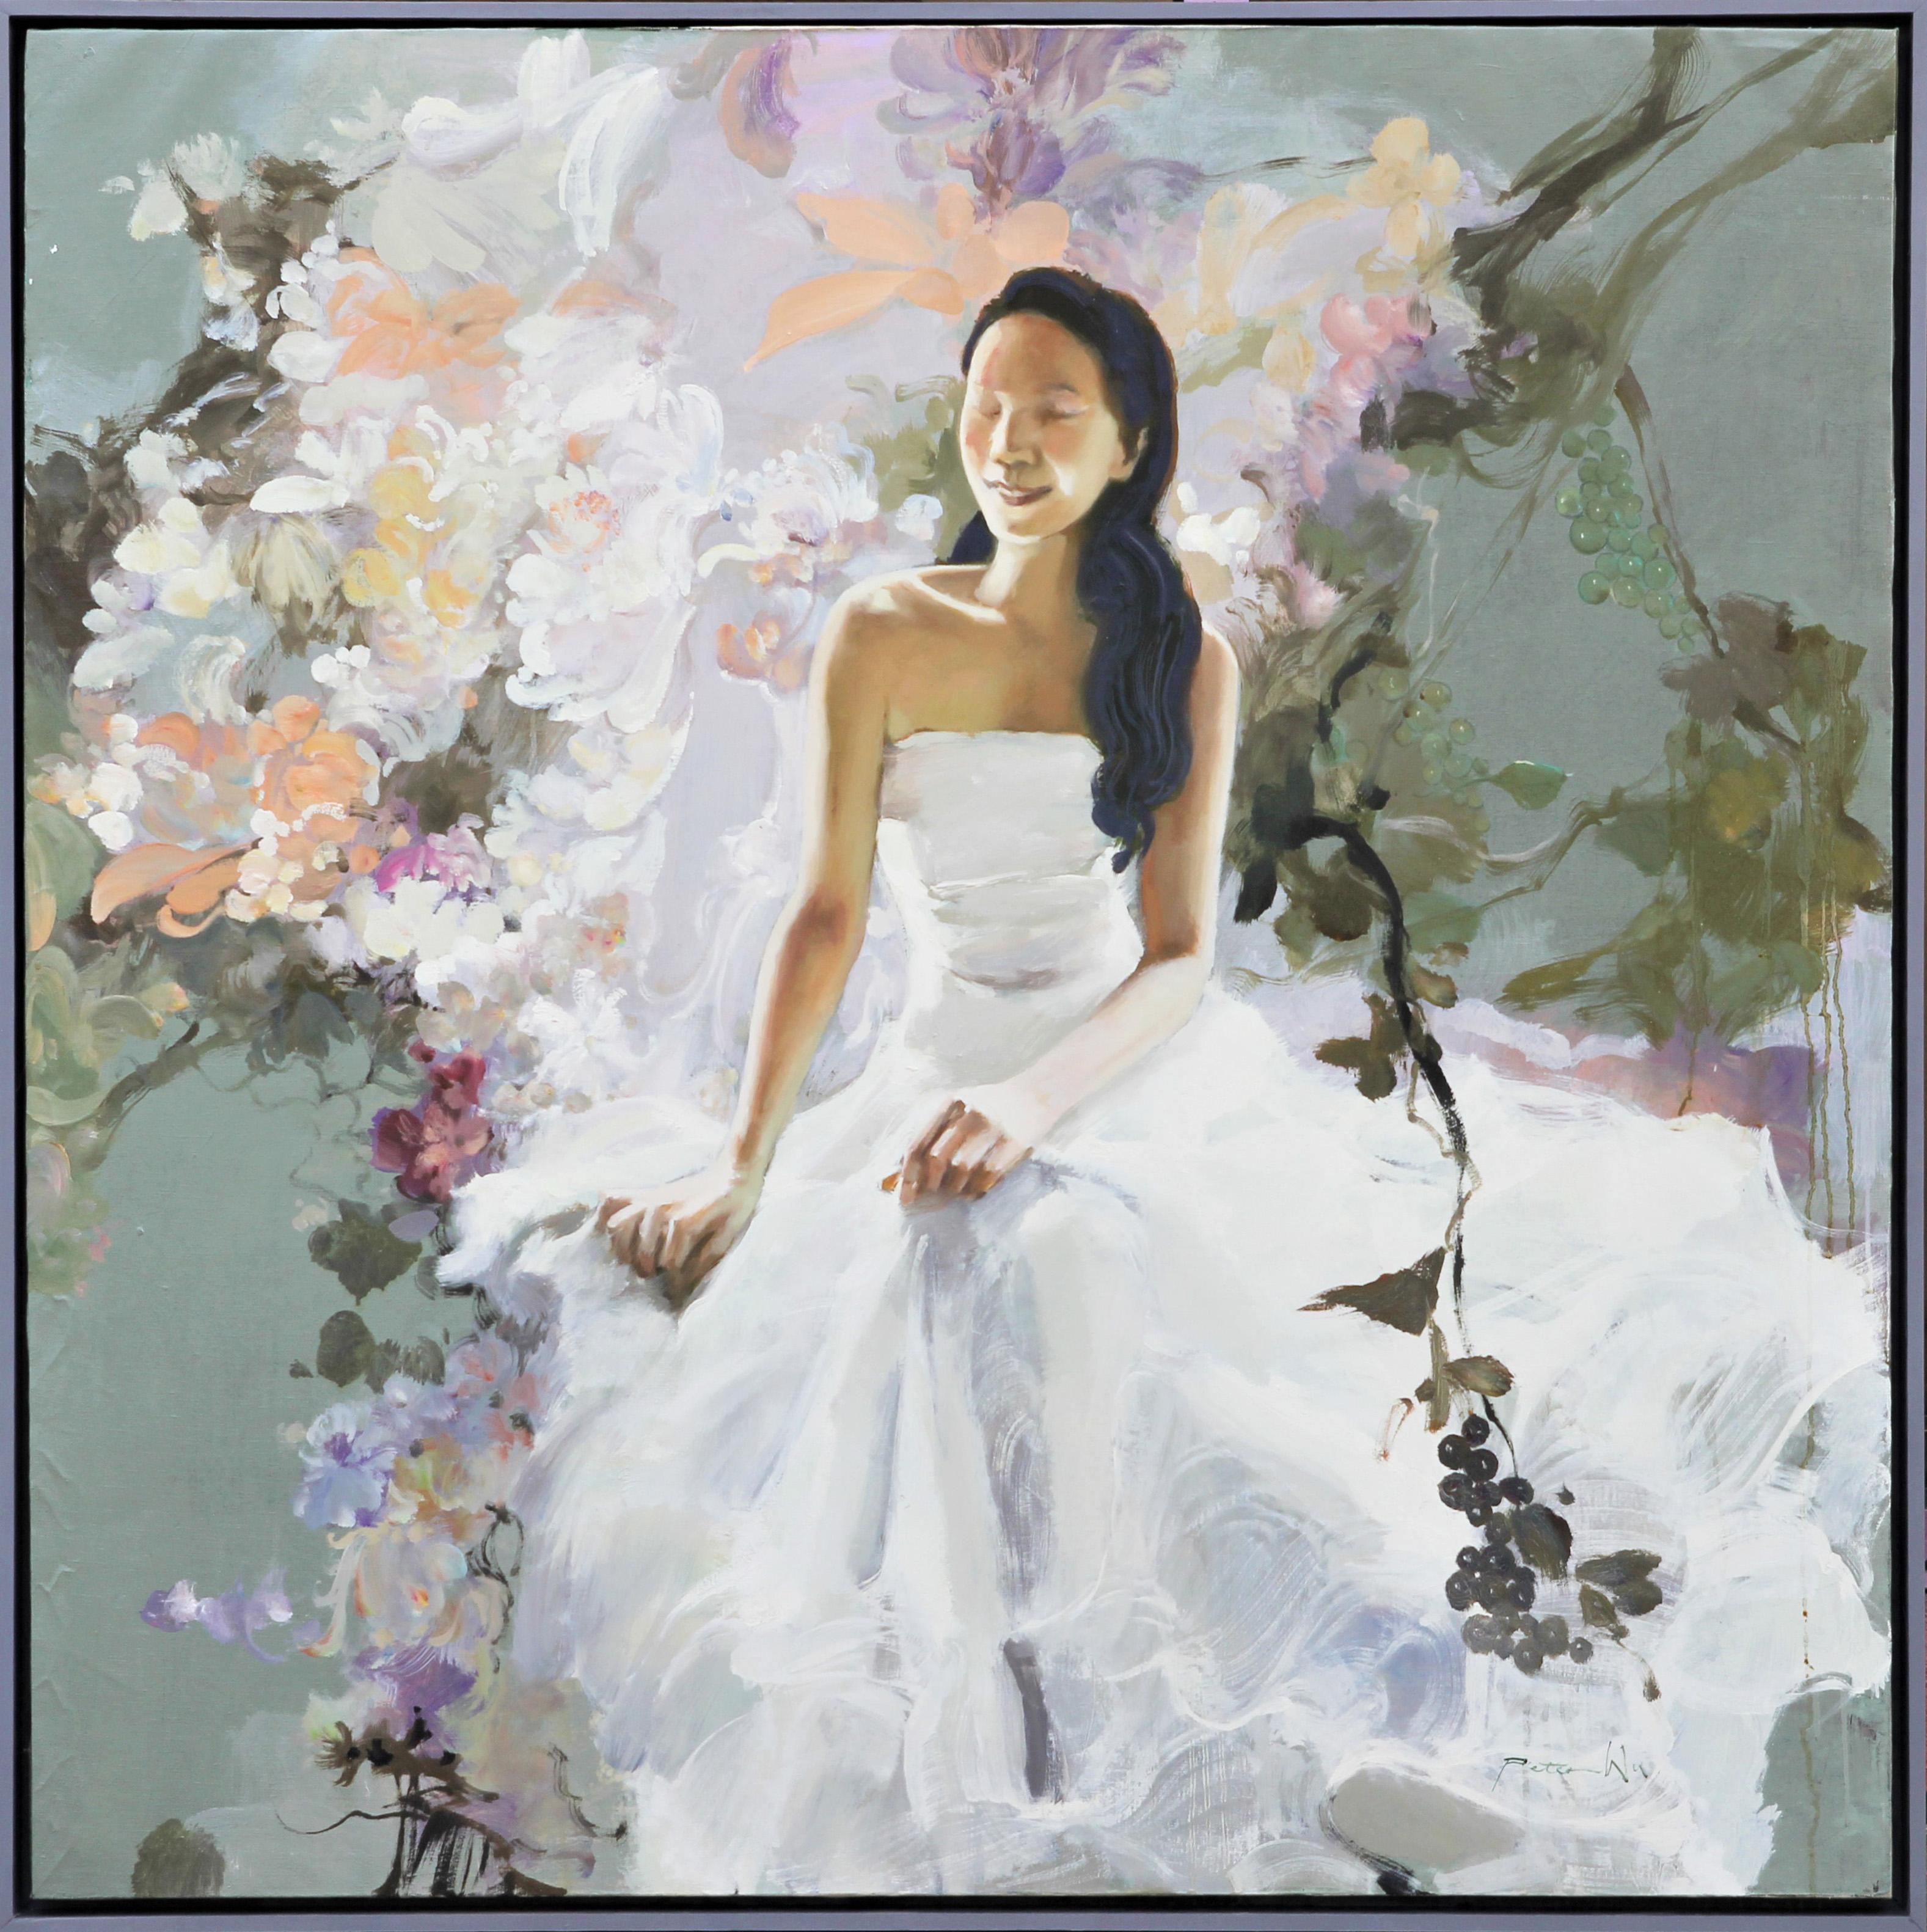 Peter Wu Figurative Painting - "Listening" Large Abstract Pastel Floral Portrait of A Woman in a White Dress